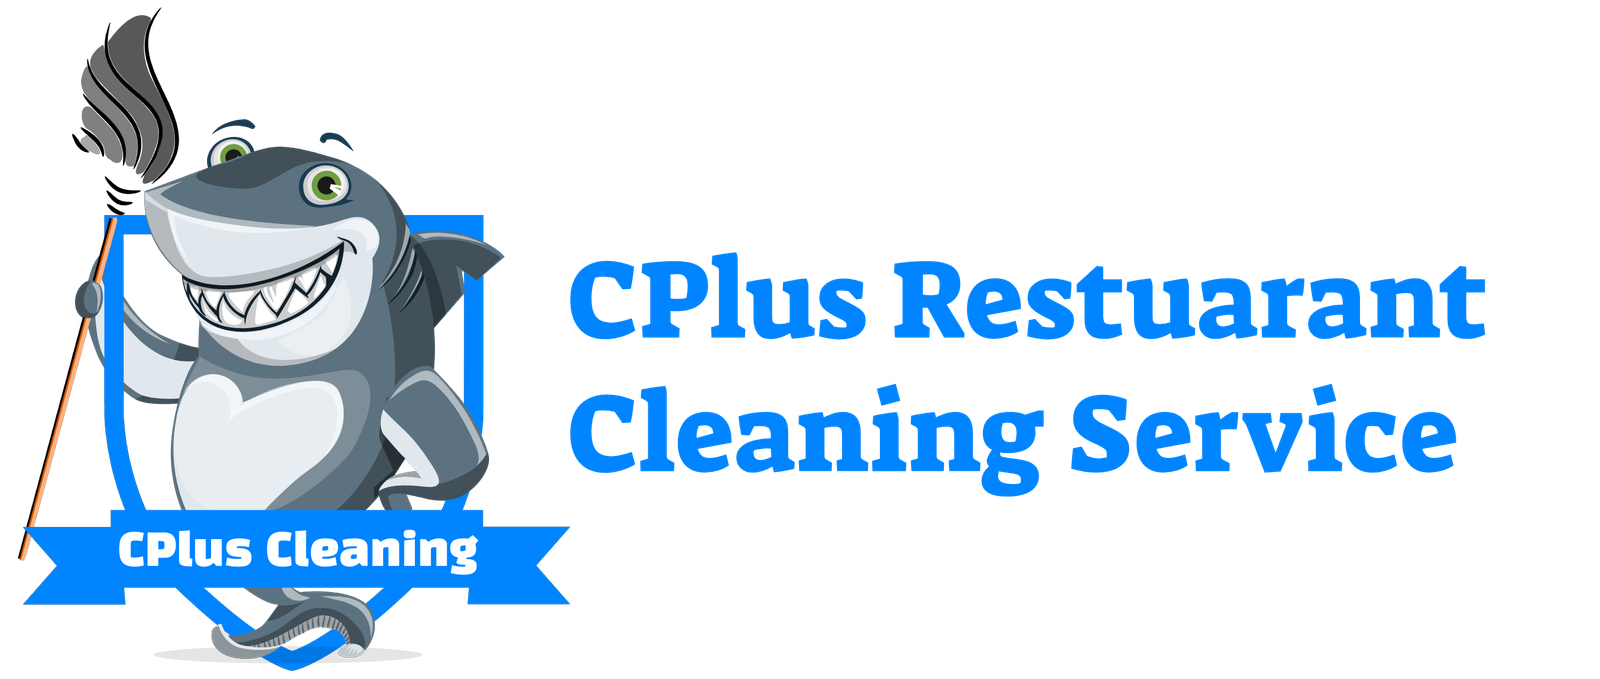 CPlus Cleaning Services